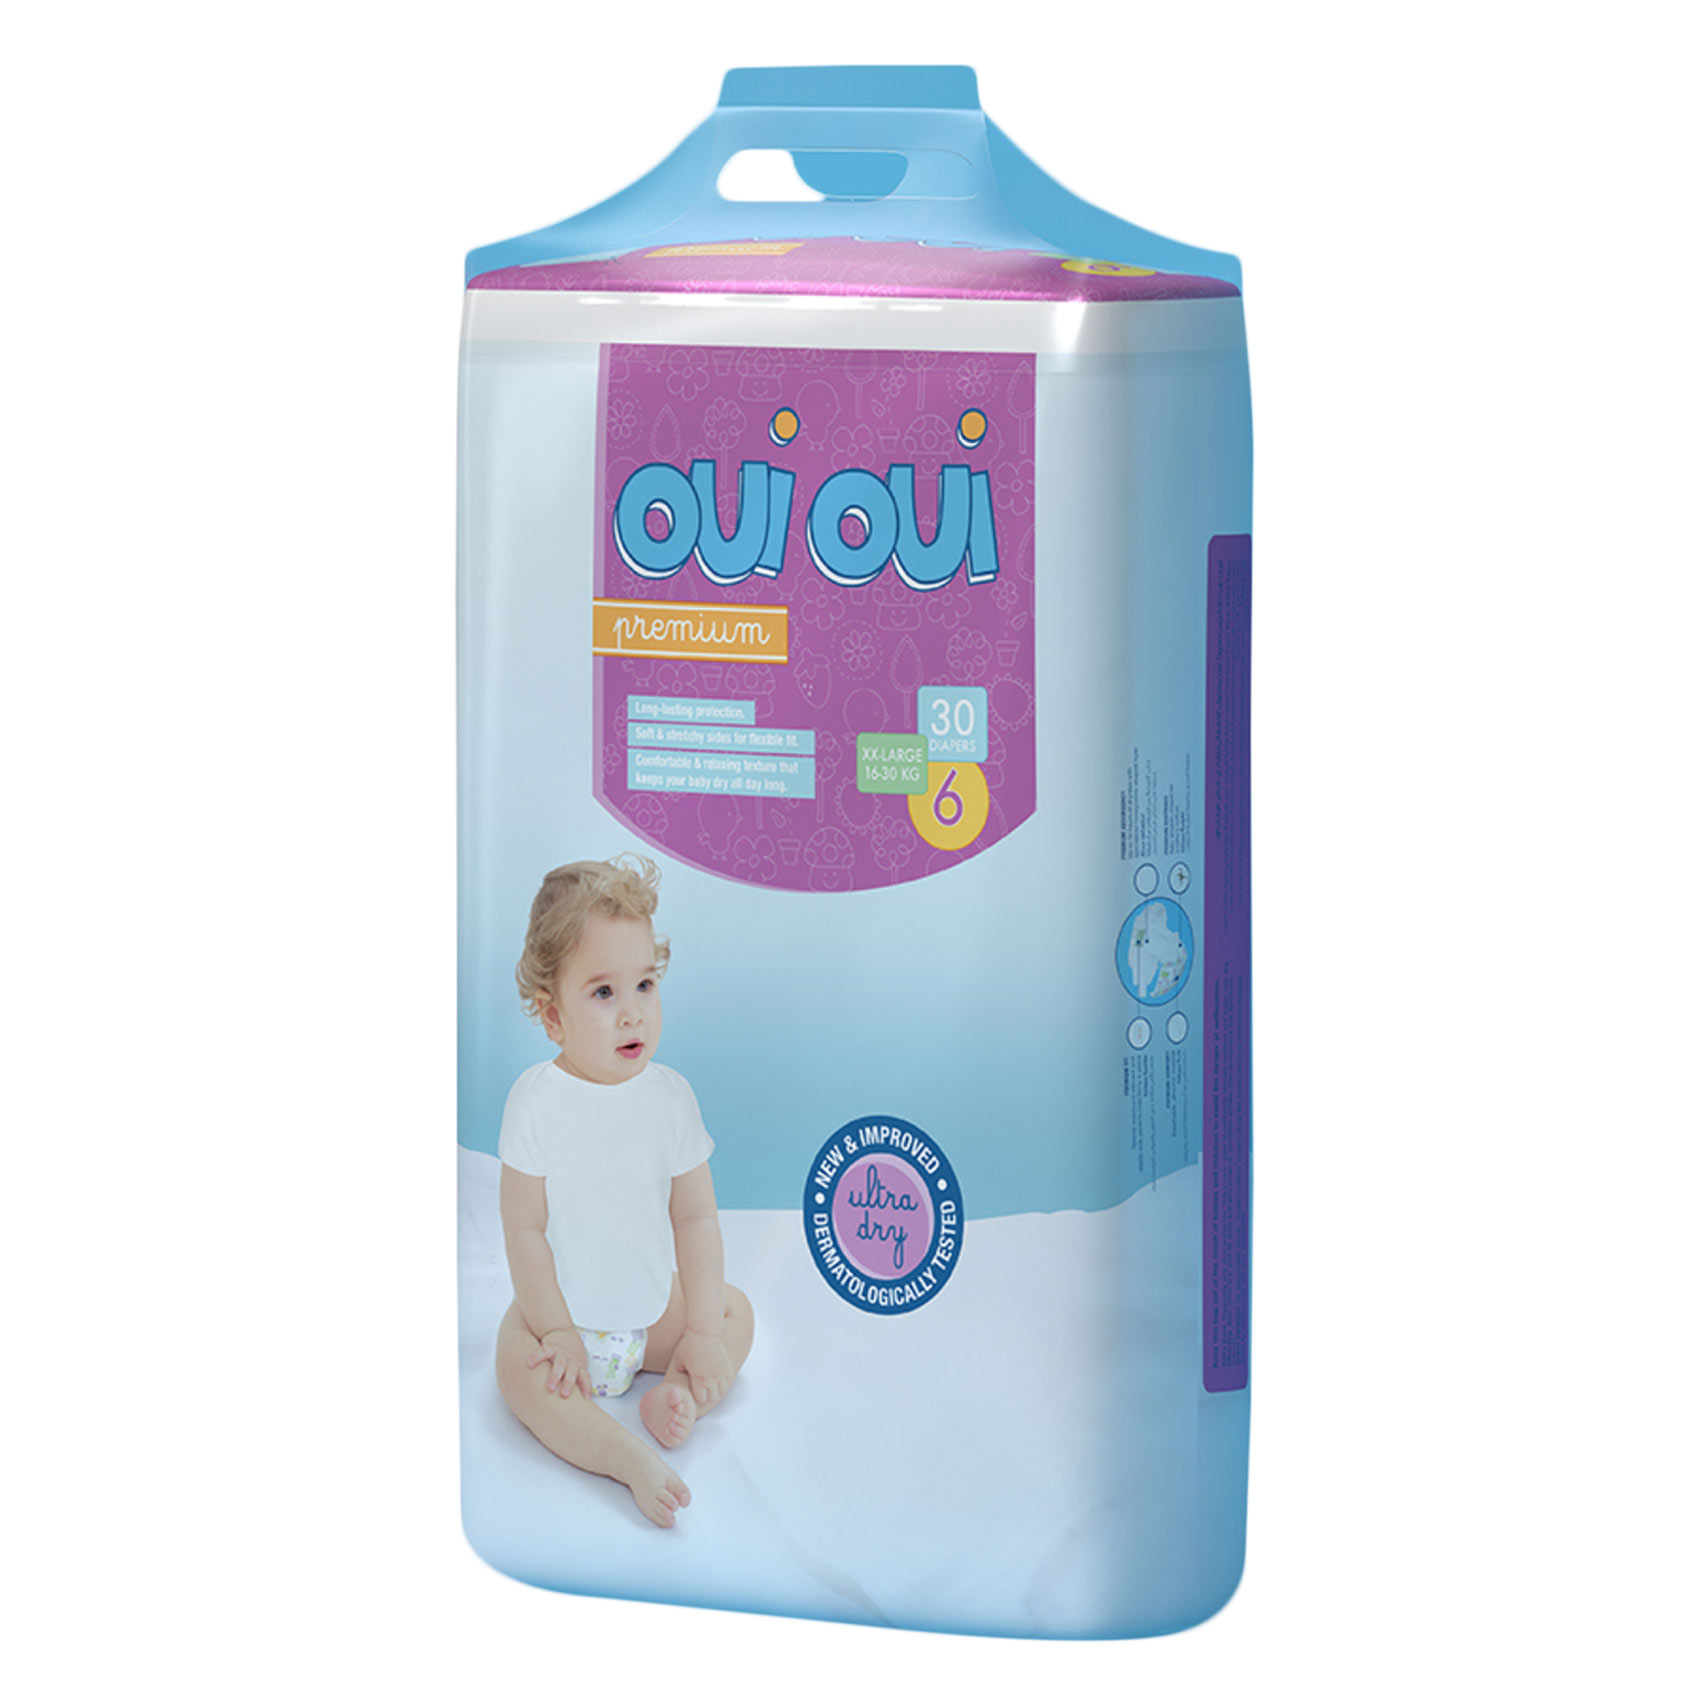 Oui Oui Xx-Large 6 Diapers 30 Count 16 To 28KG